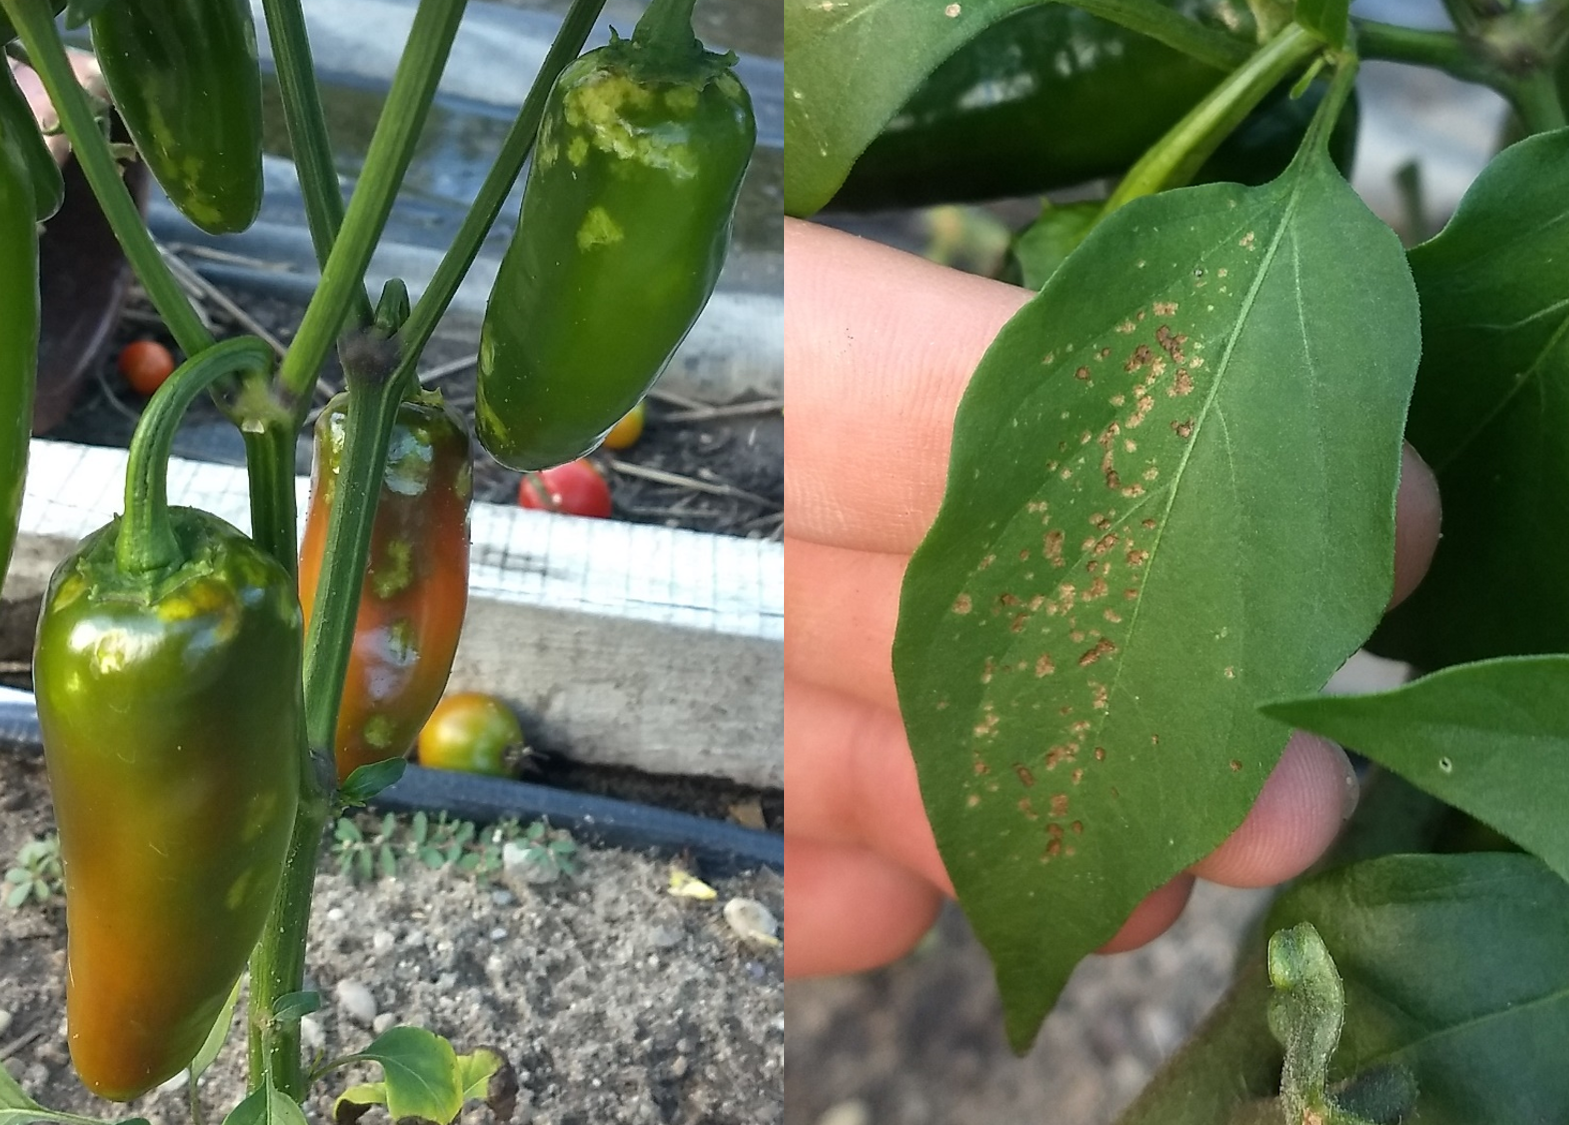 Brown marmorated stink bug damage in jalapeno peppe